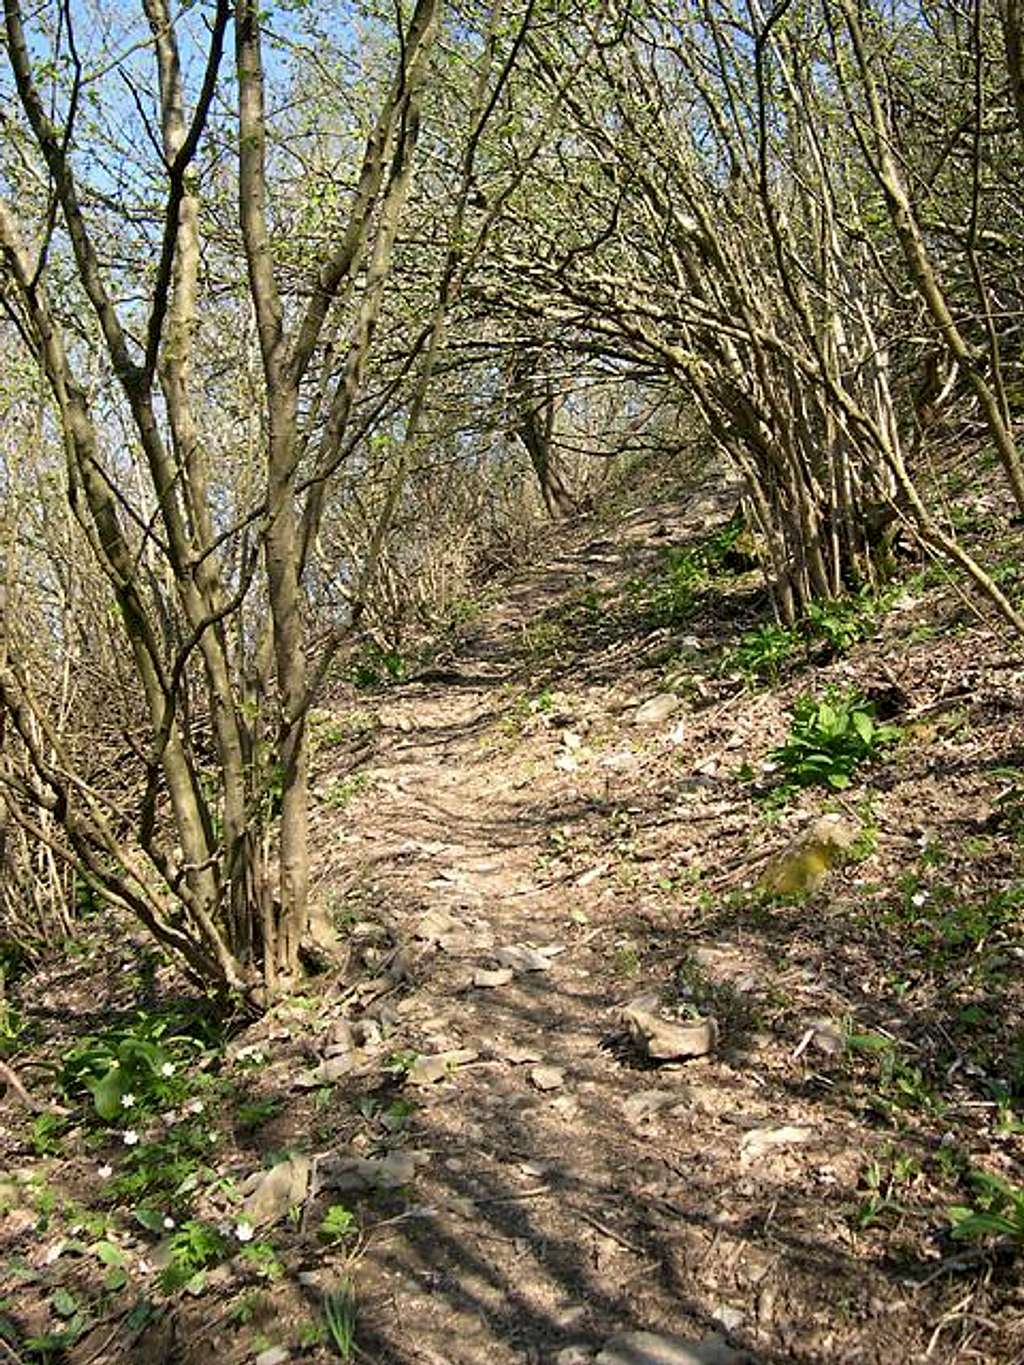 Along the pleasant pathway inside a grove